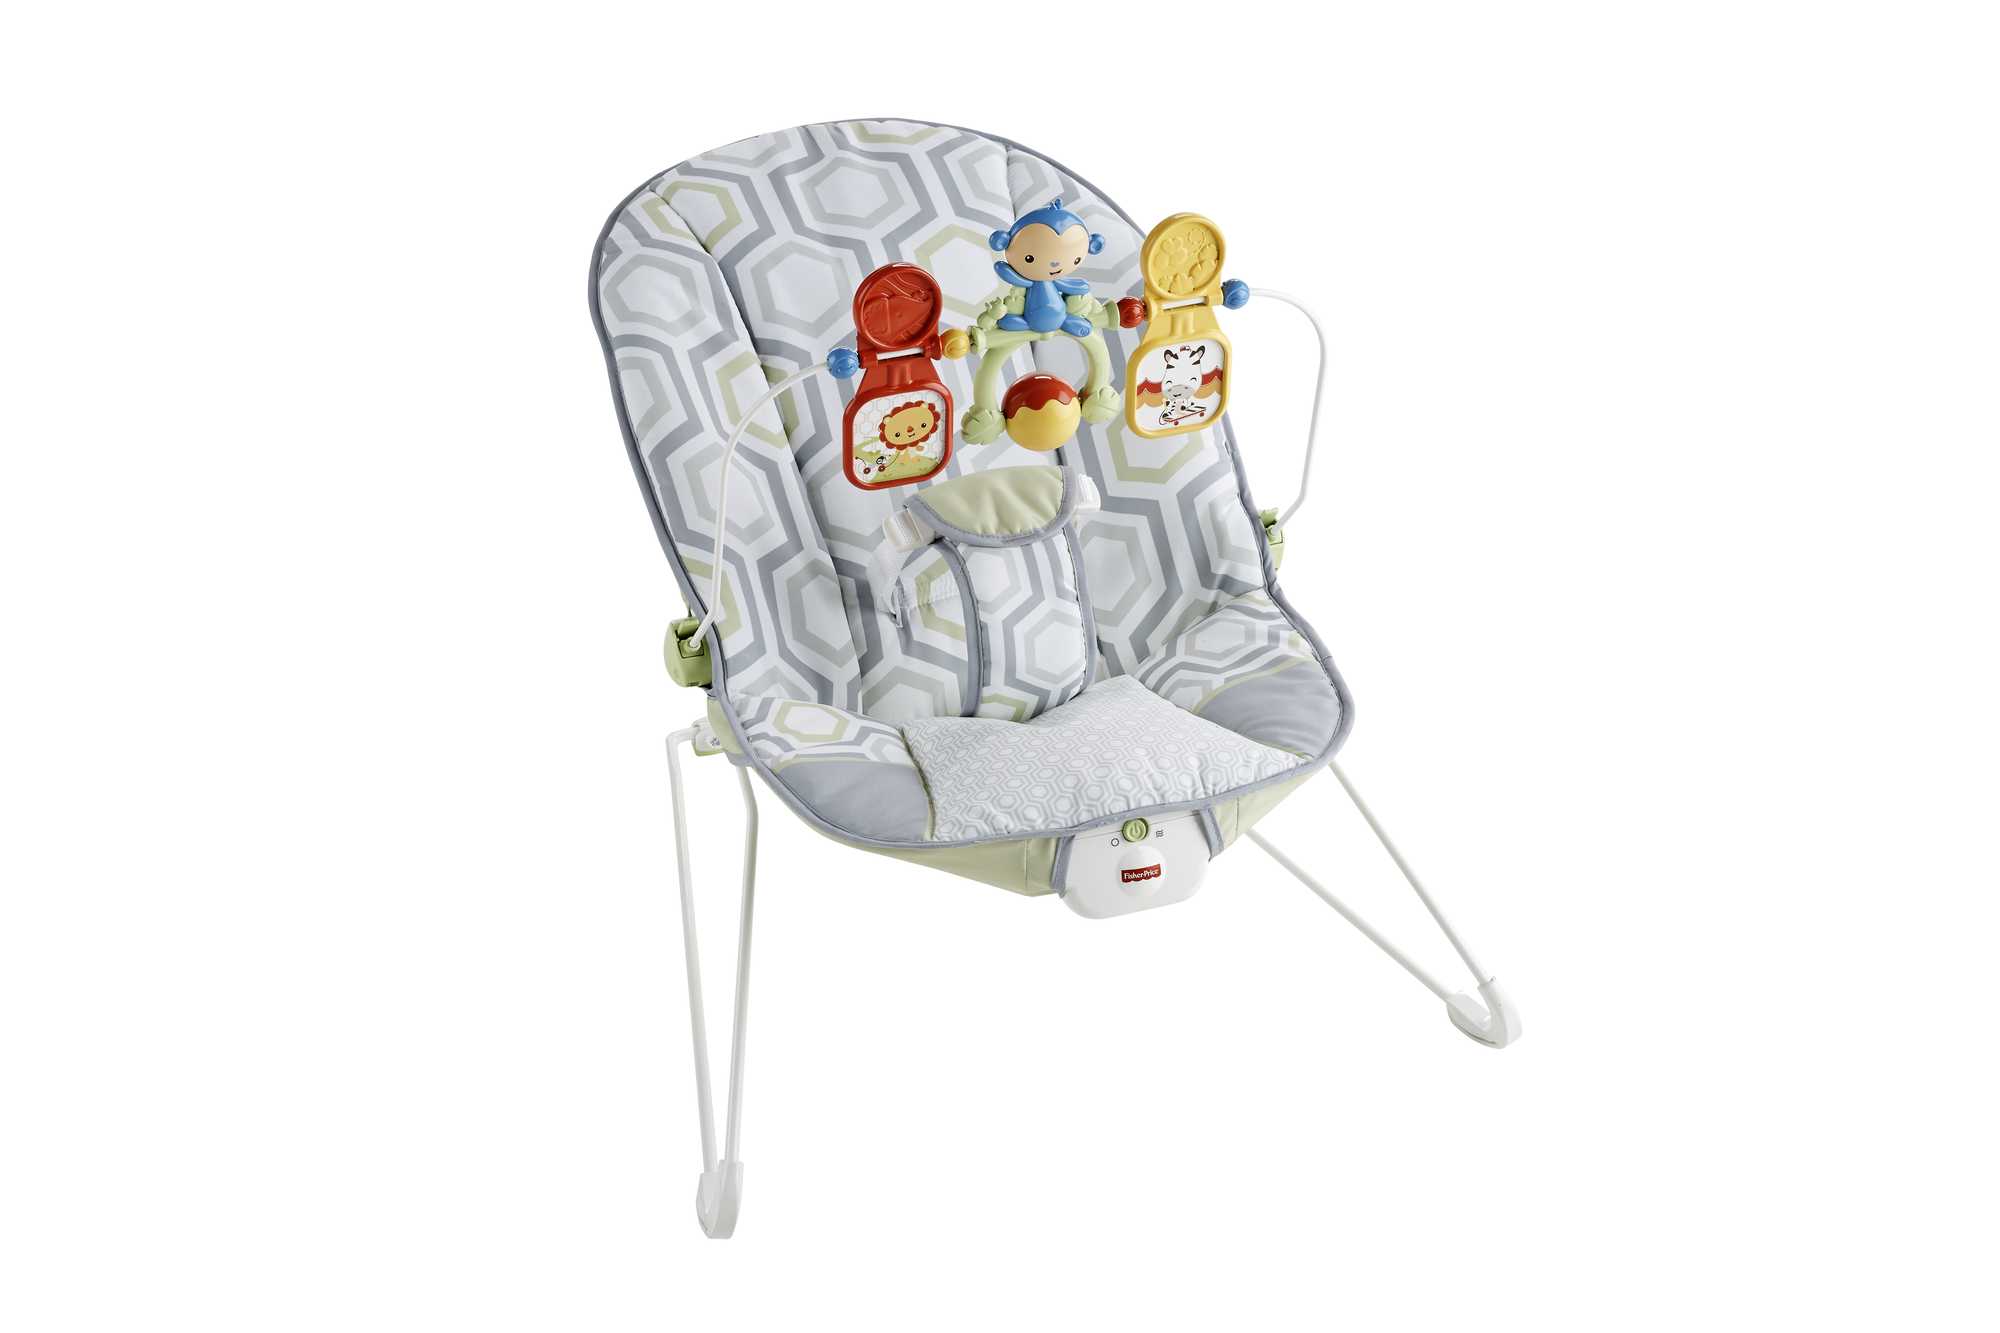 Fisher-Price Baby's Bouncer for Infants Birth+, Geo Meadow - image 1 of 6